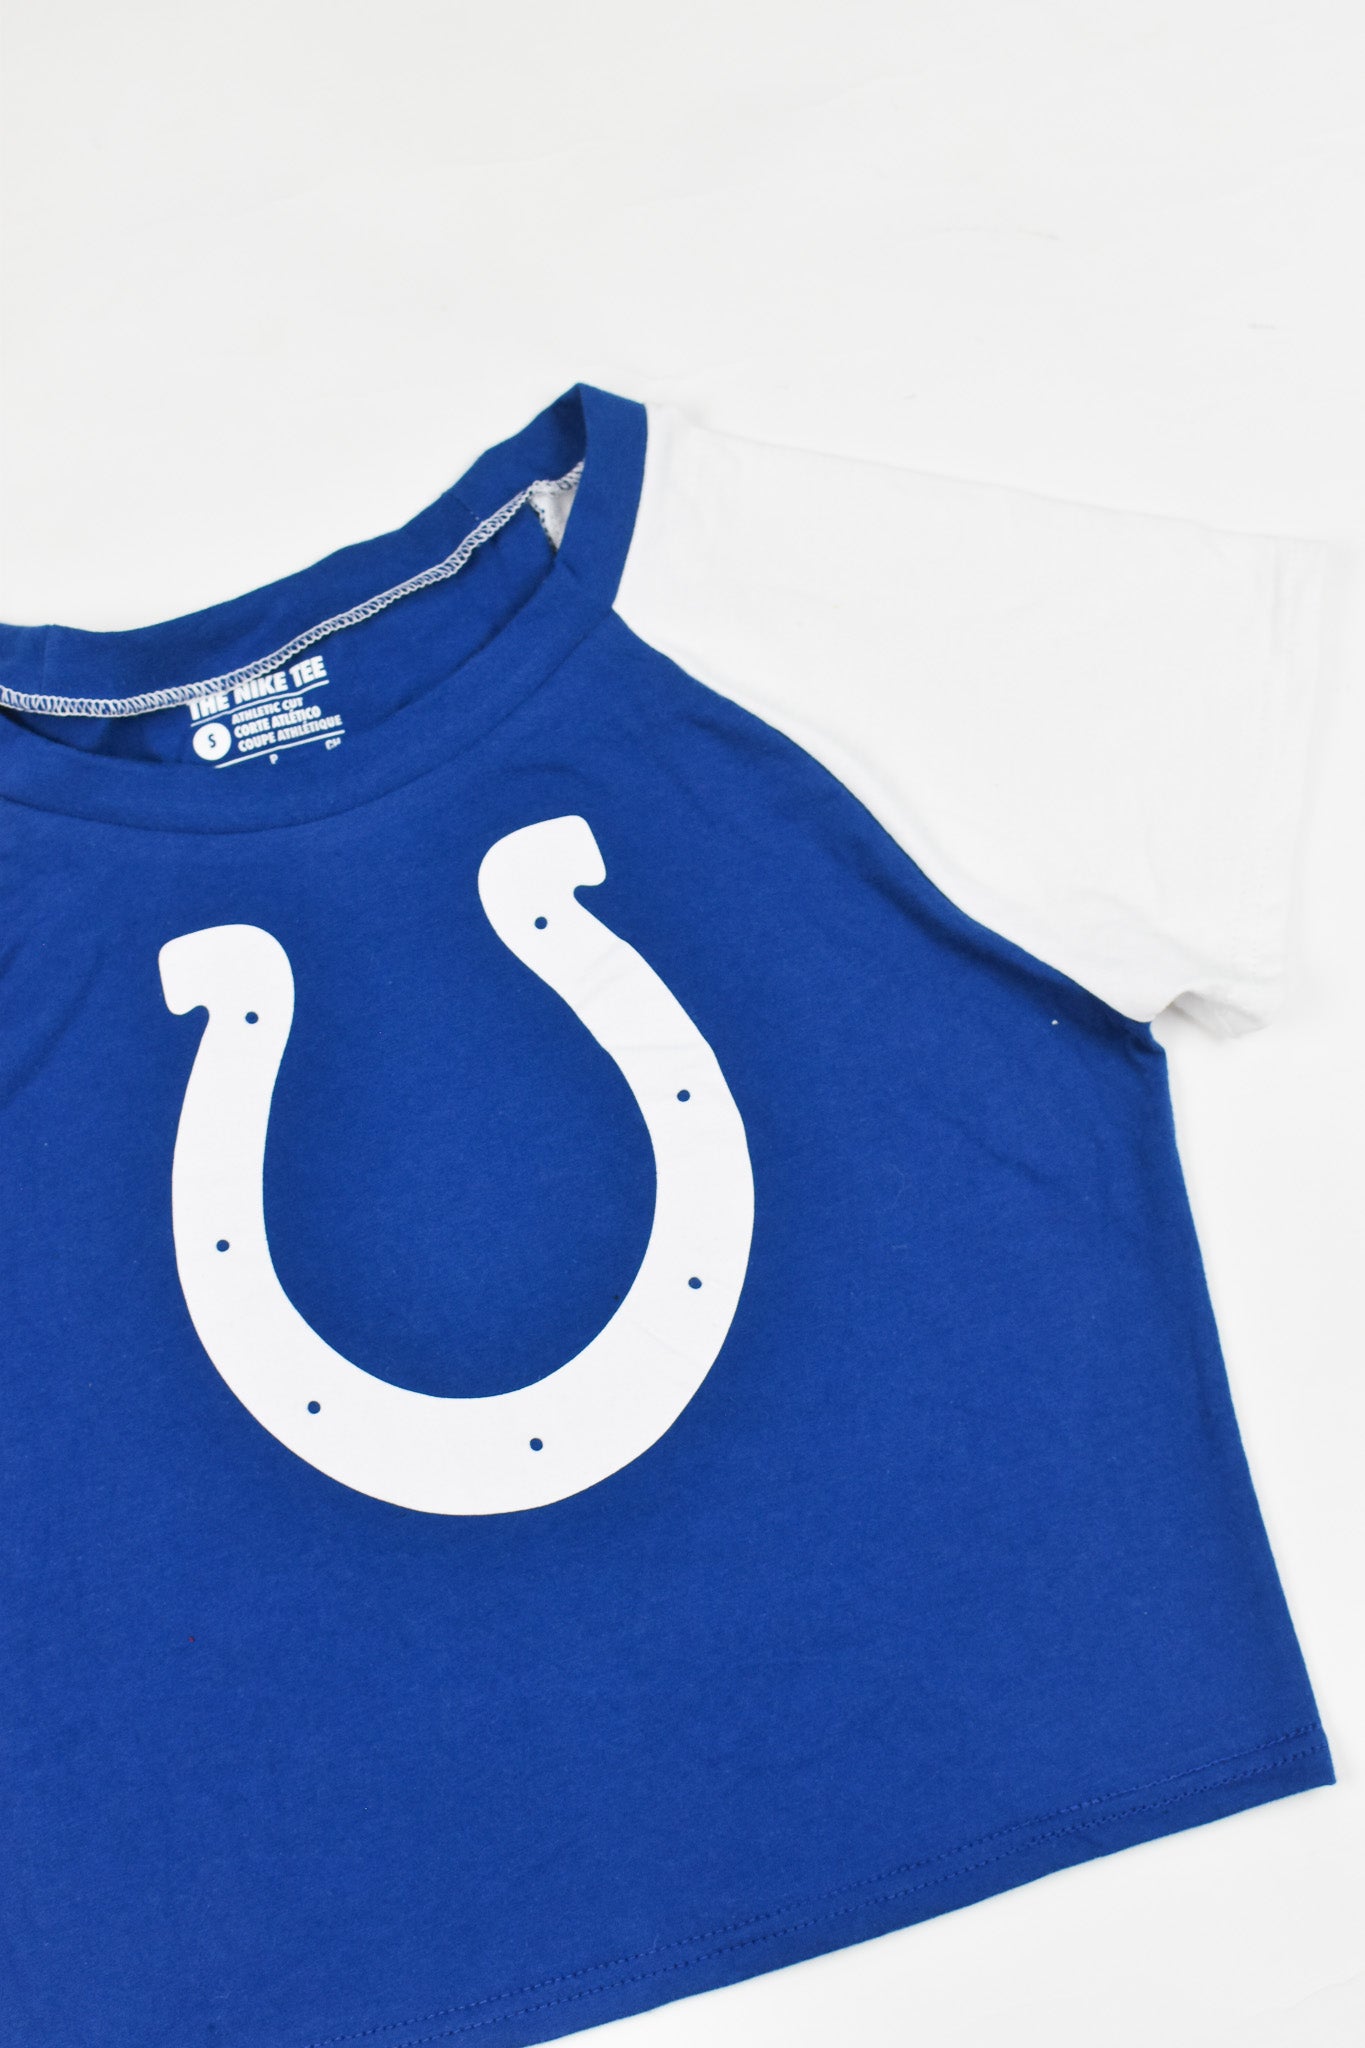 Upcycled Colts Baby Tee